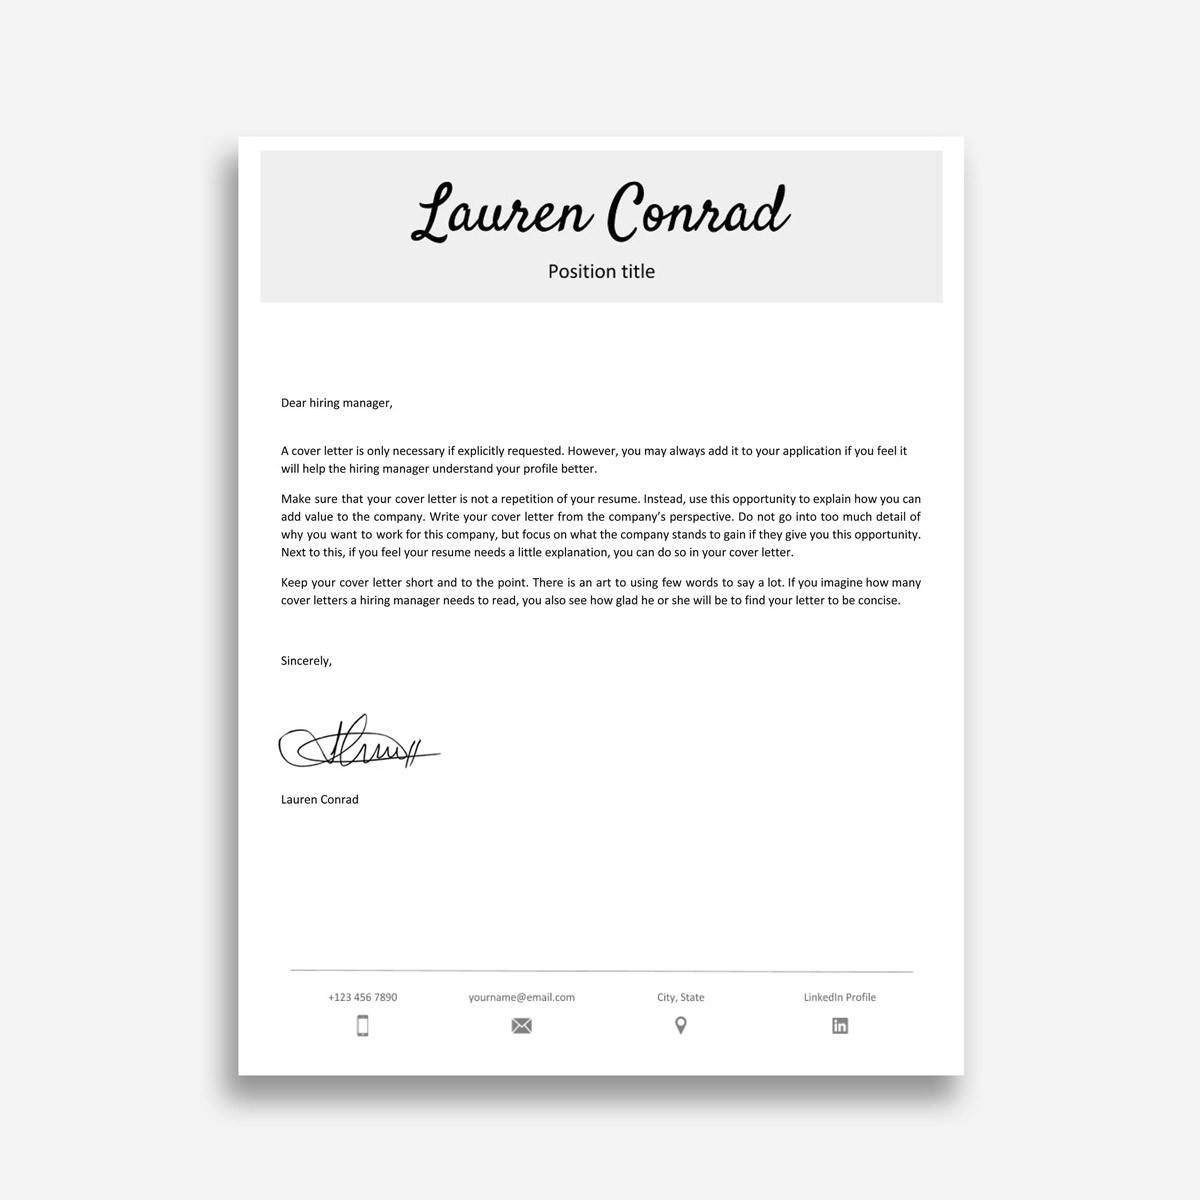 Resume Cover Letter Template Google Docs from cdn-images.zety.com